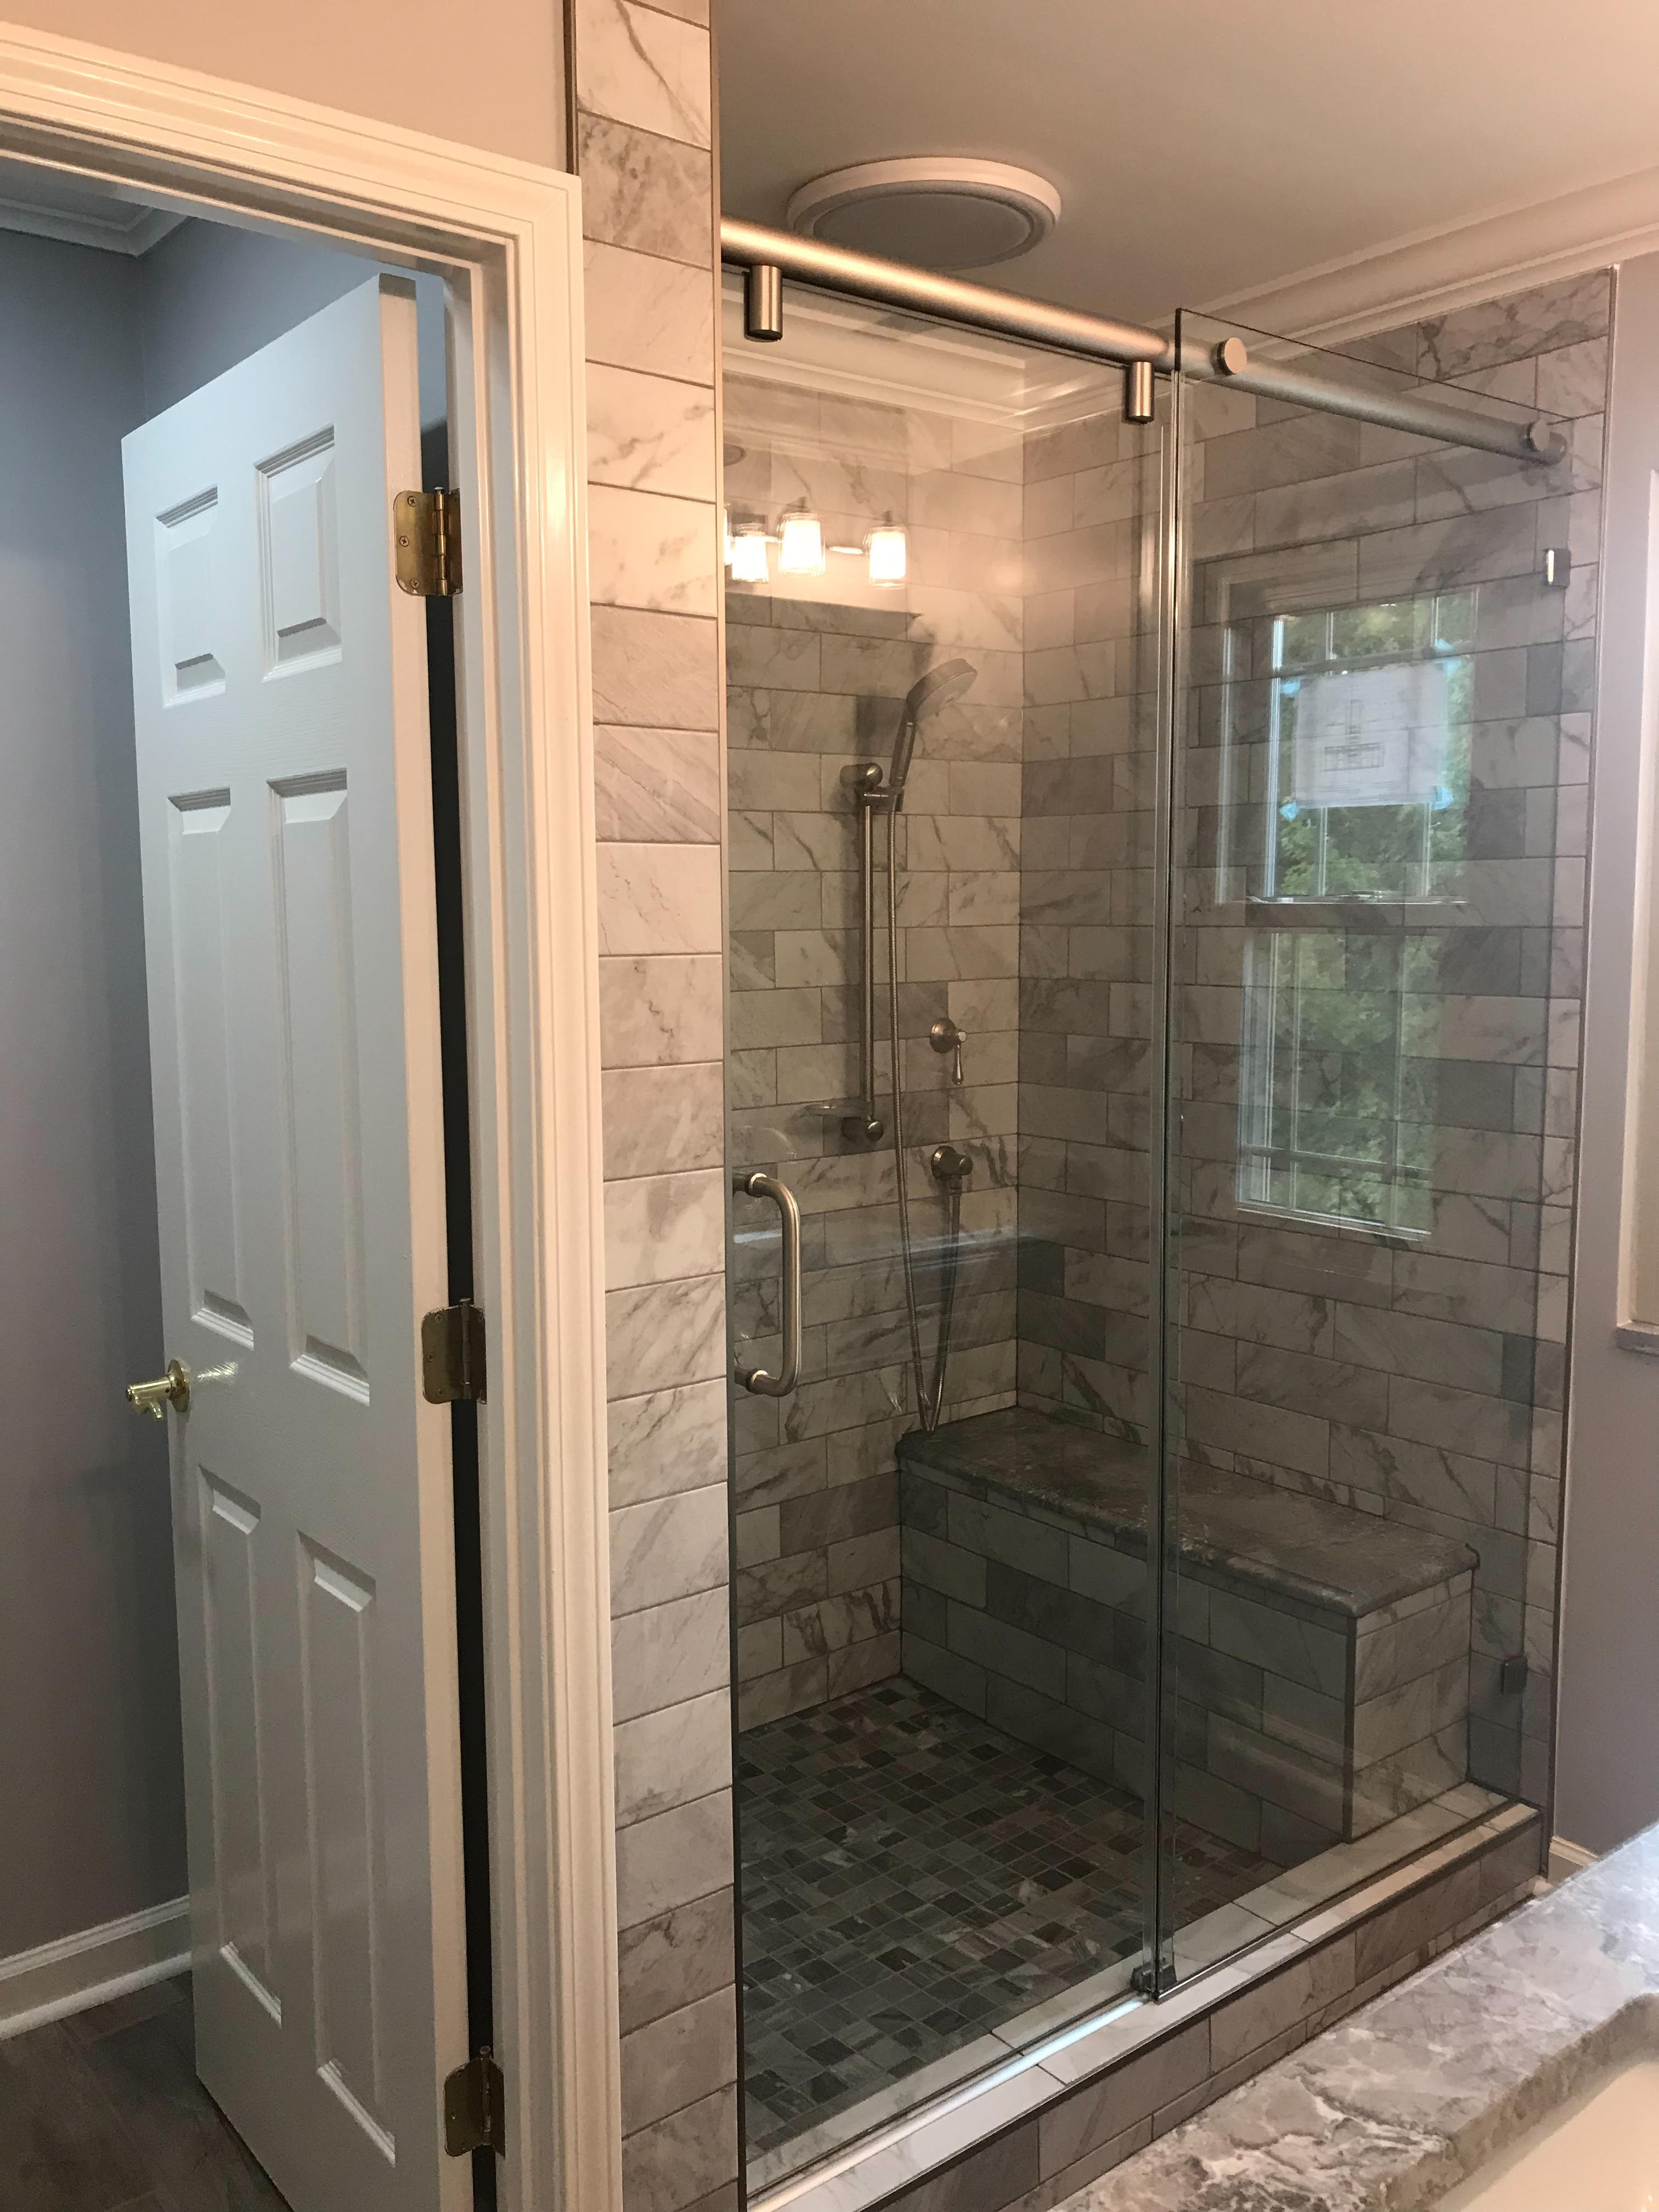 Modern looking shower with sliding glass